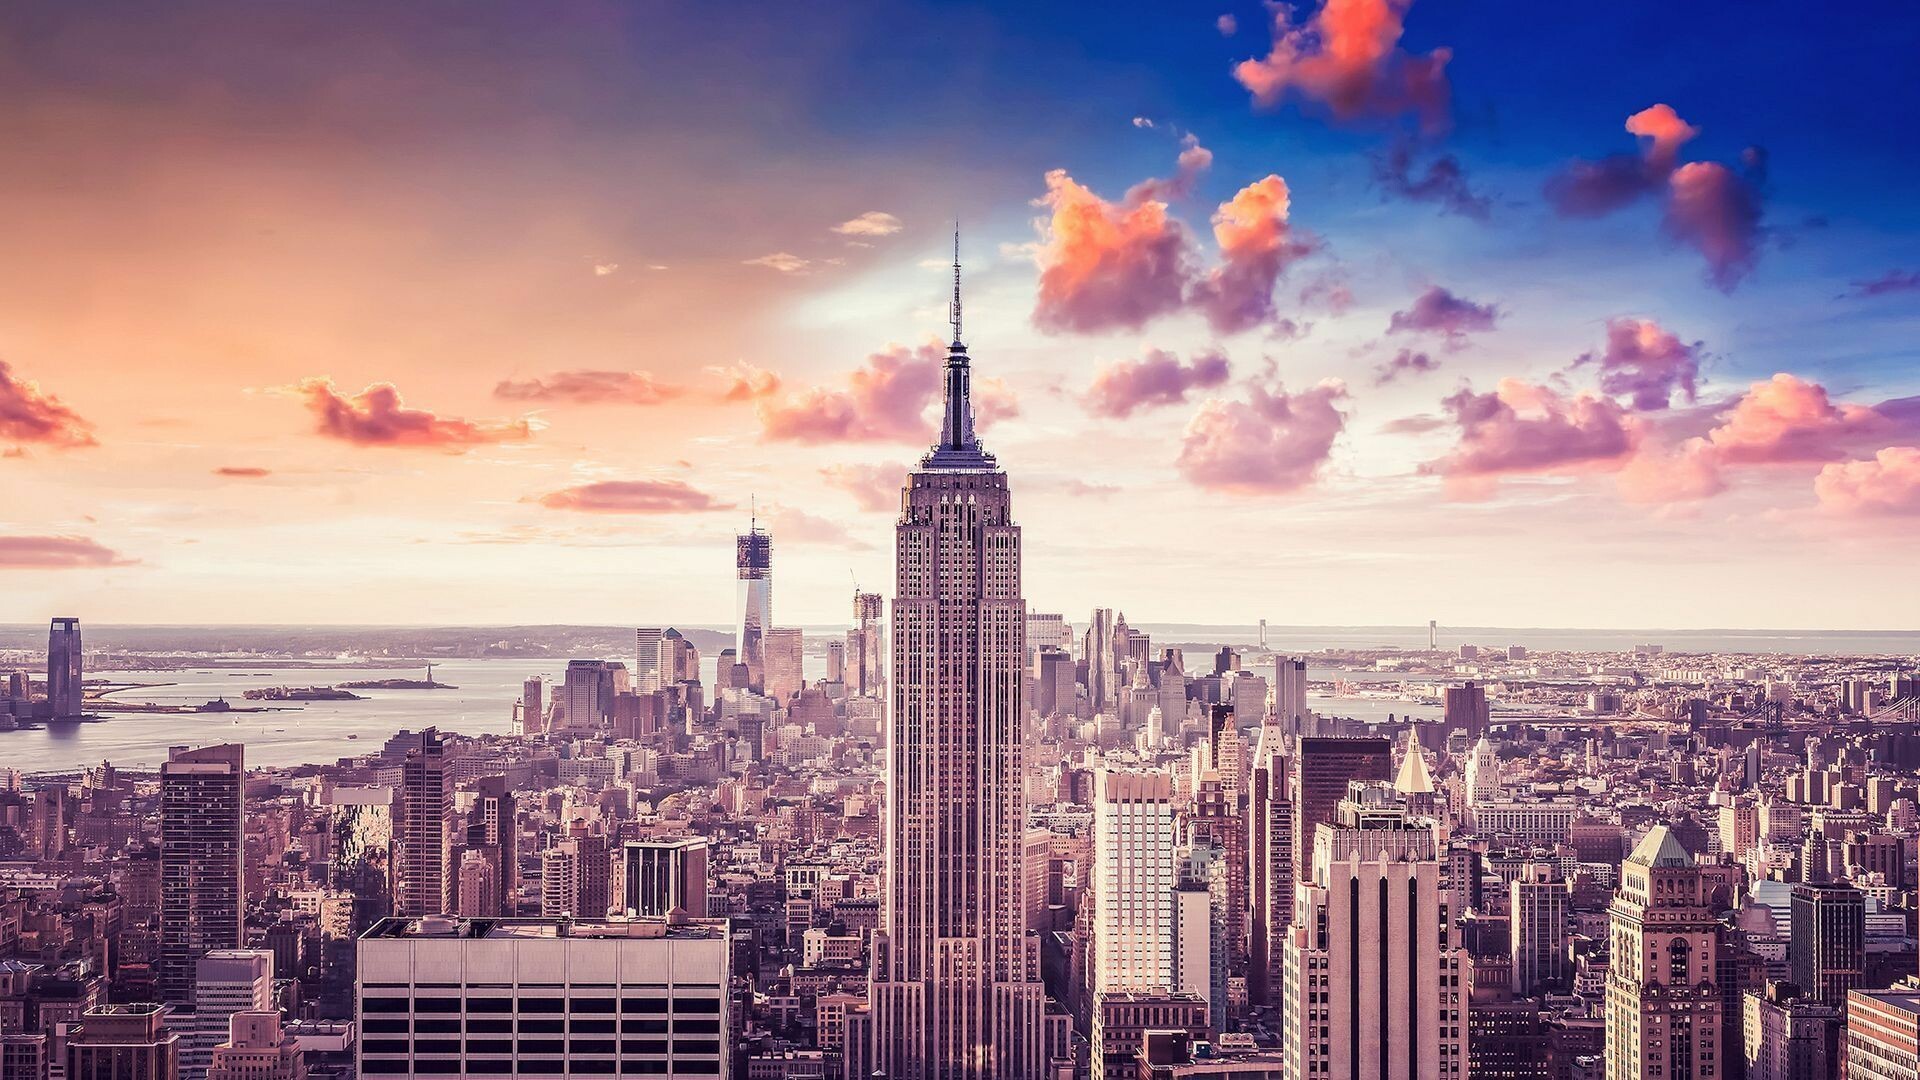 72+ New York HD Wallpapers: HD, 4K, 5K for PC and Mobile | Download free  images for iPhone, Android